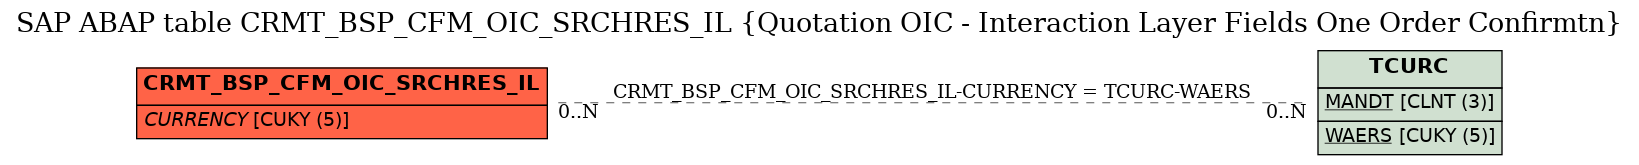 E-R Diagram for table CRMT_BSP_CFM_OIC_SRCHRES_IL (Quotation OIC - Interaction Layer Fields One Order Confirmtn)